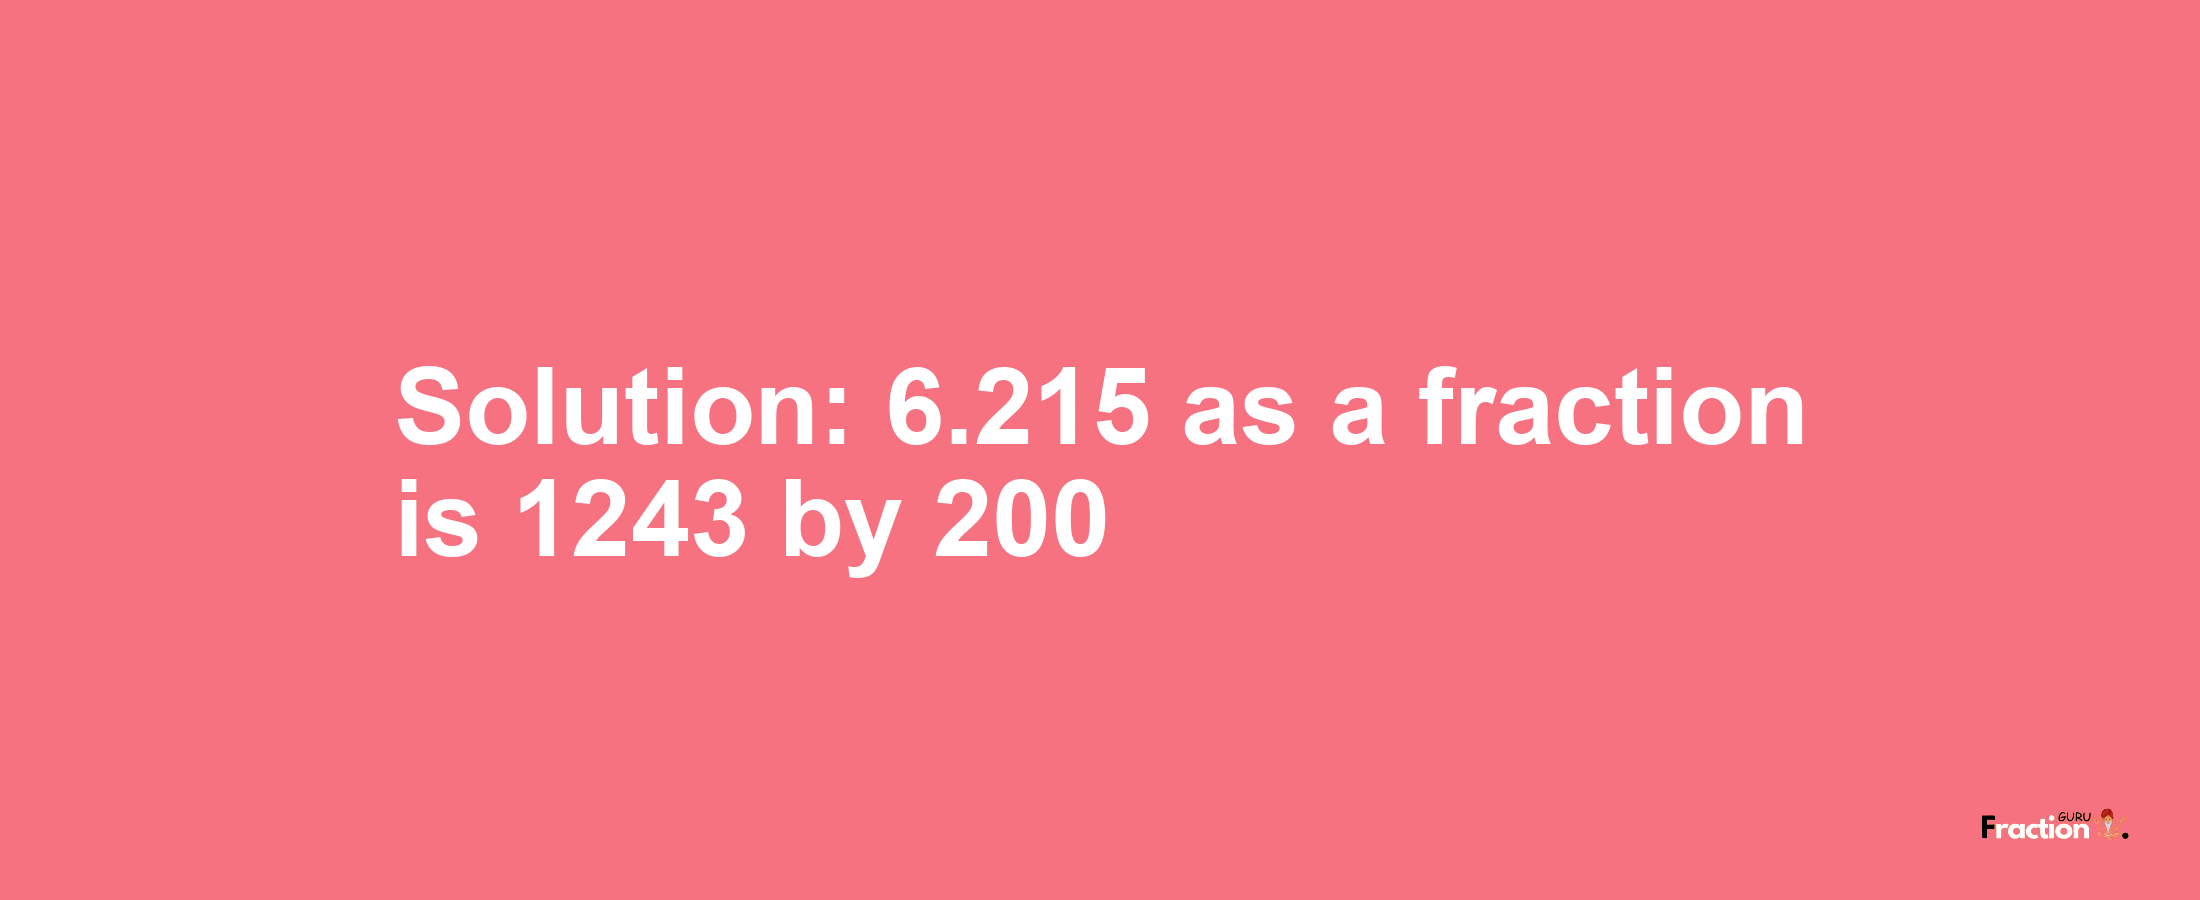 Solution:6.215 as a fraction is 1243/200